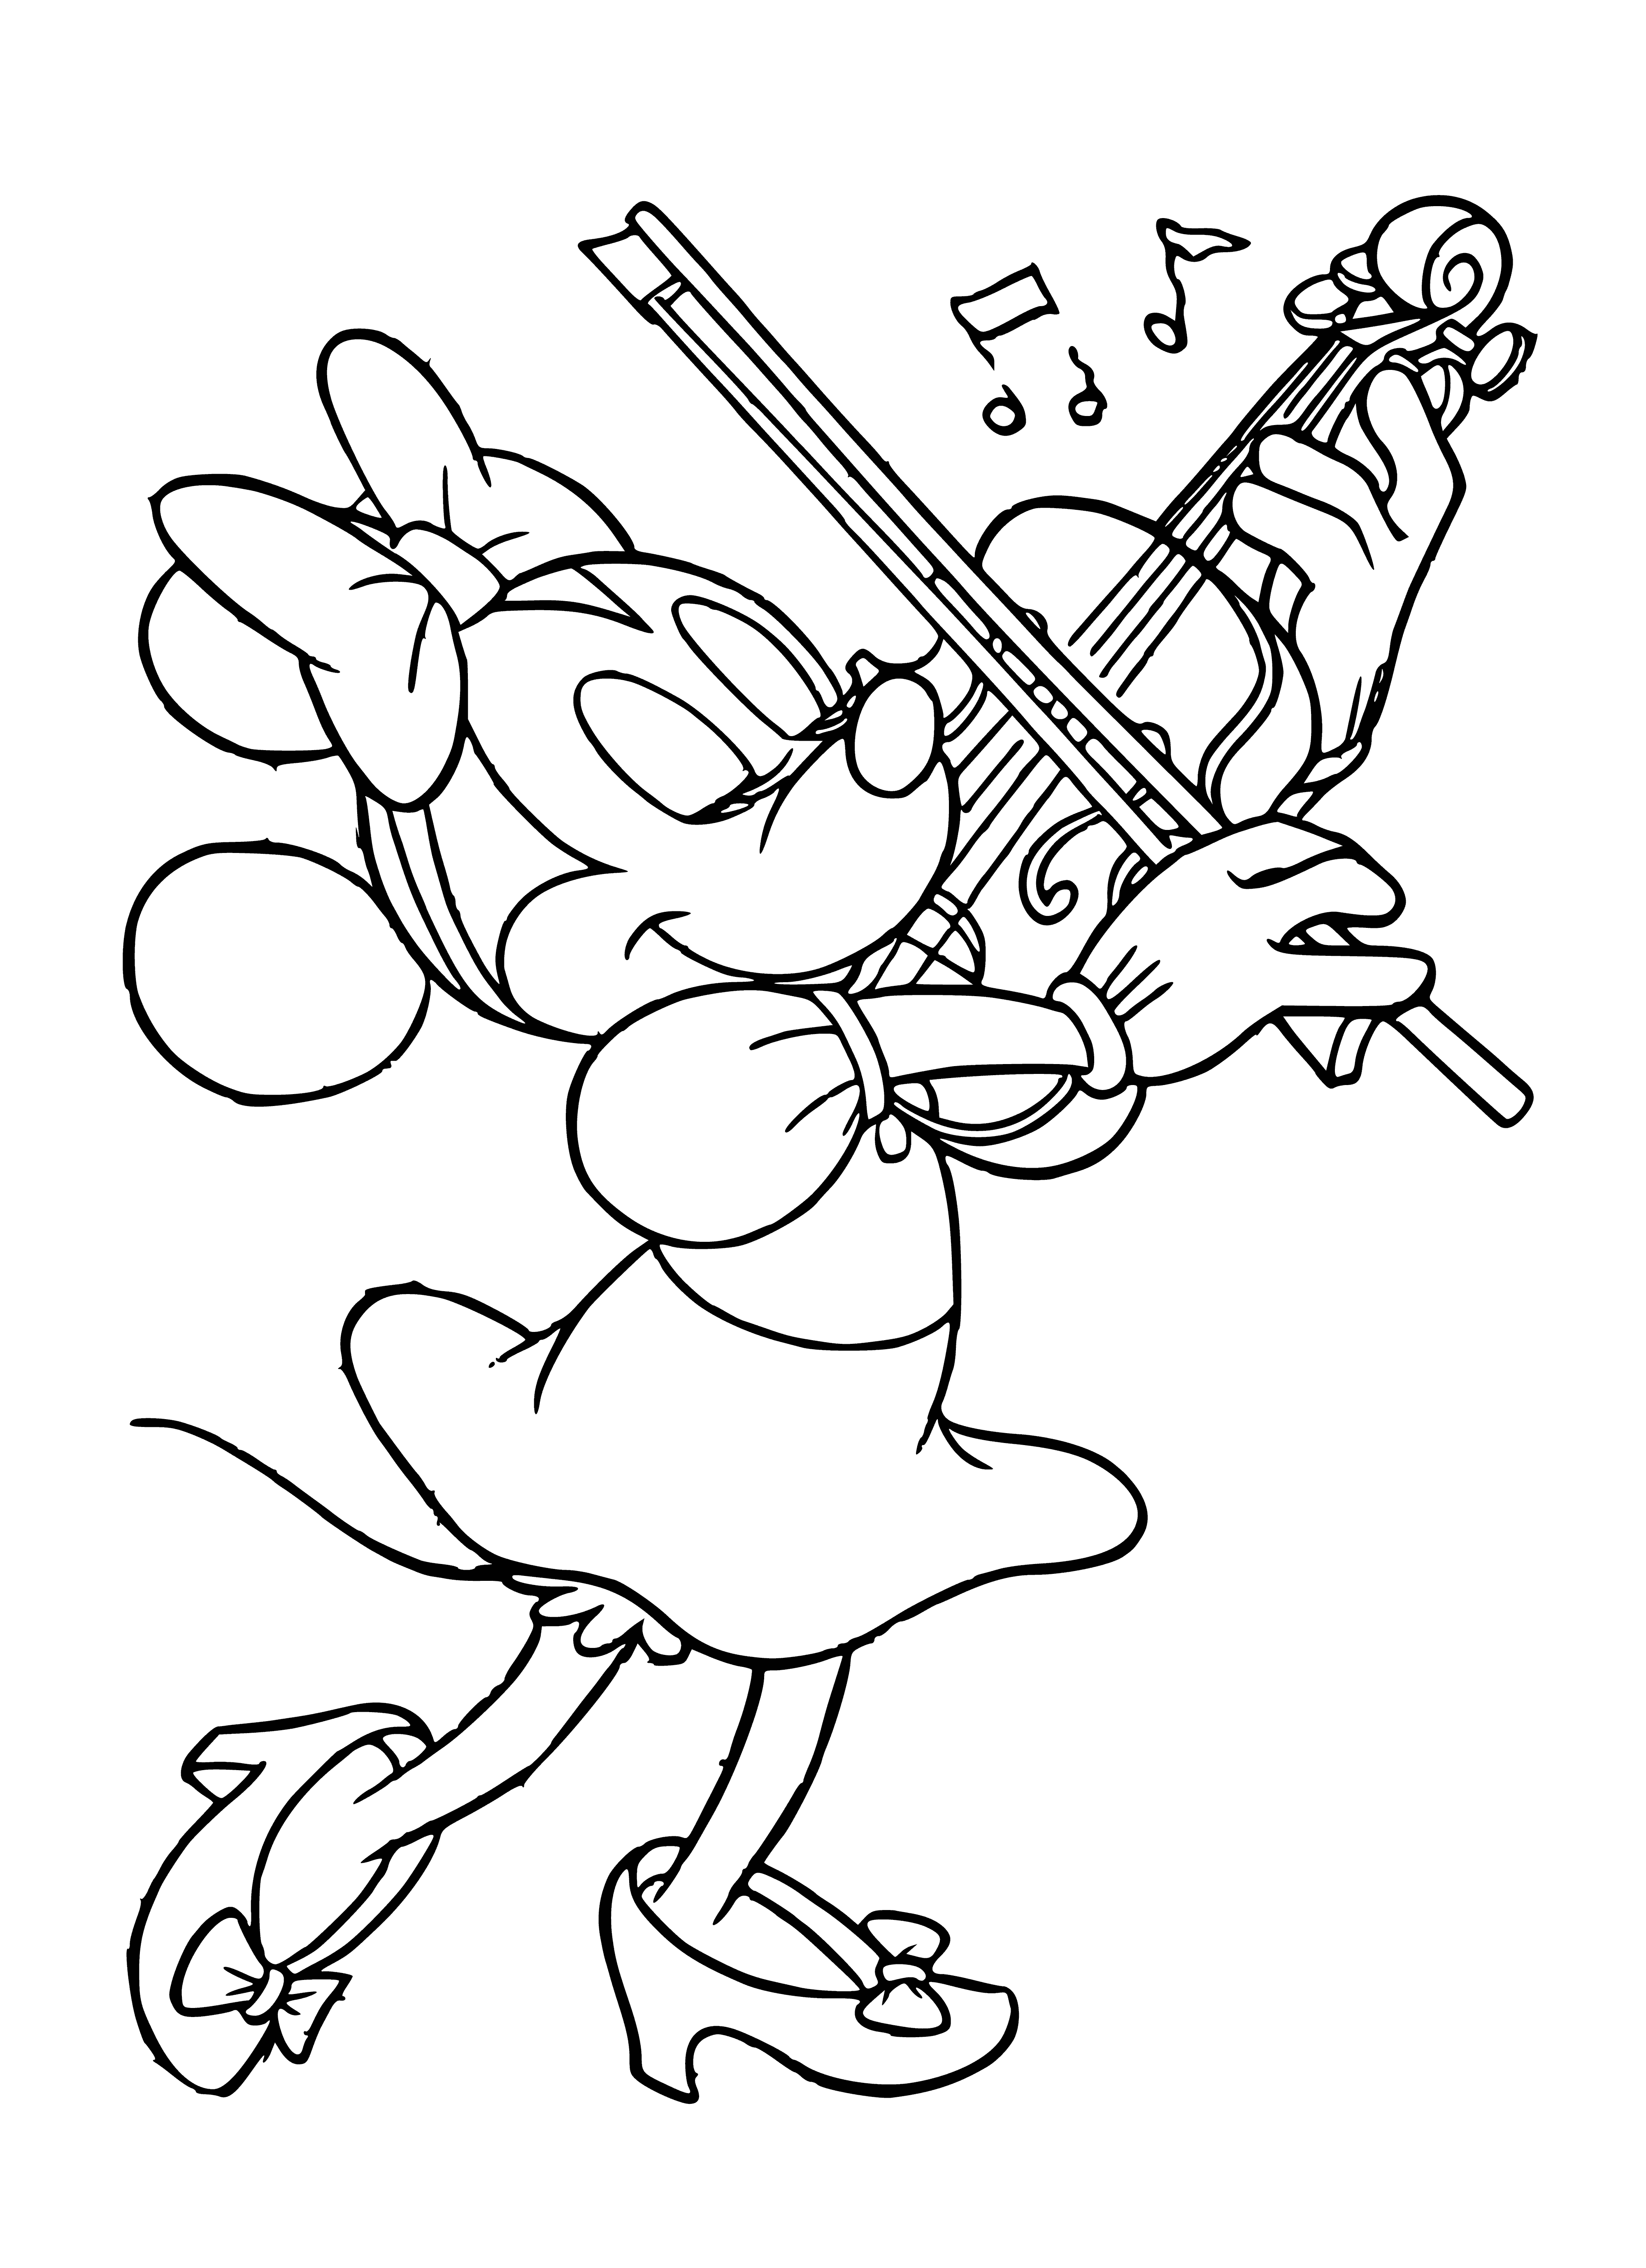 Violinist coloring page